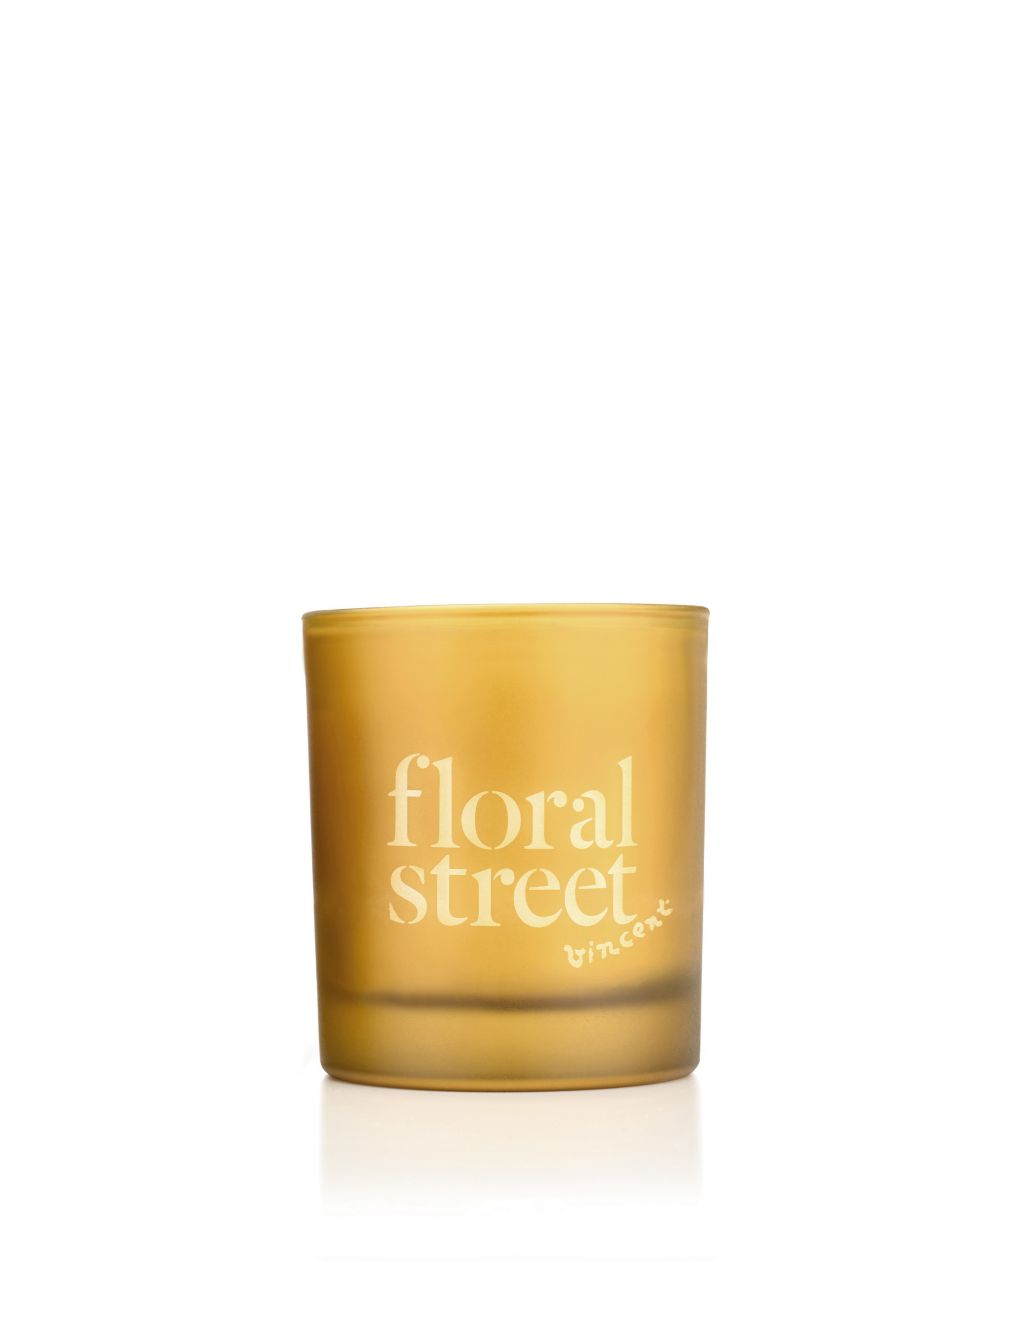 Sunflower Pop Scented Candle image 1